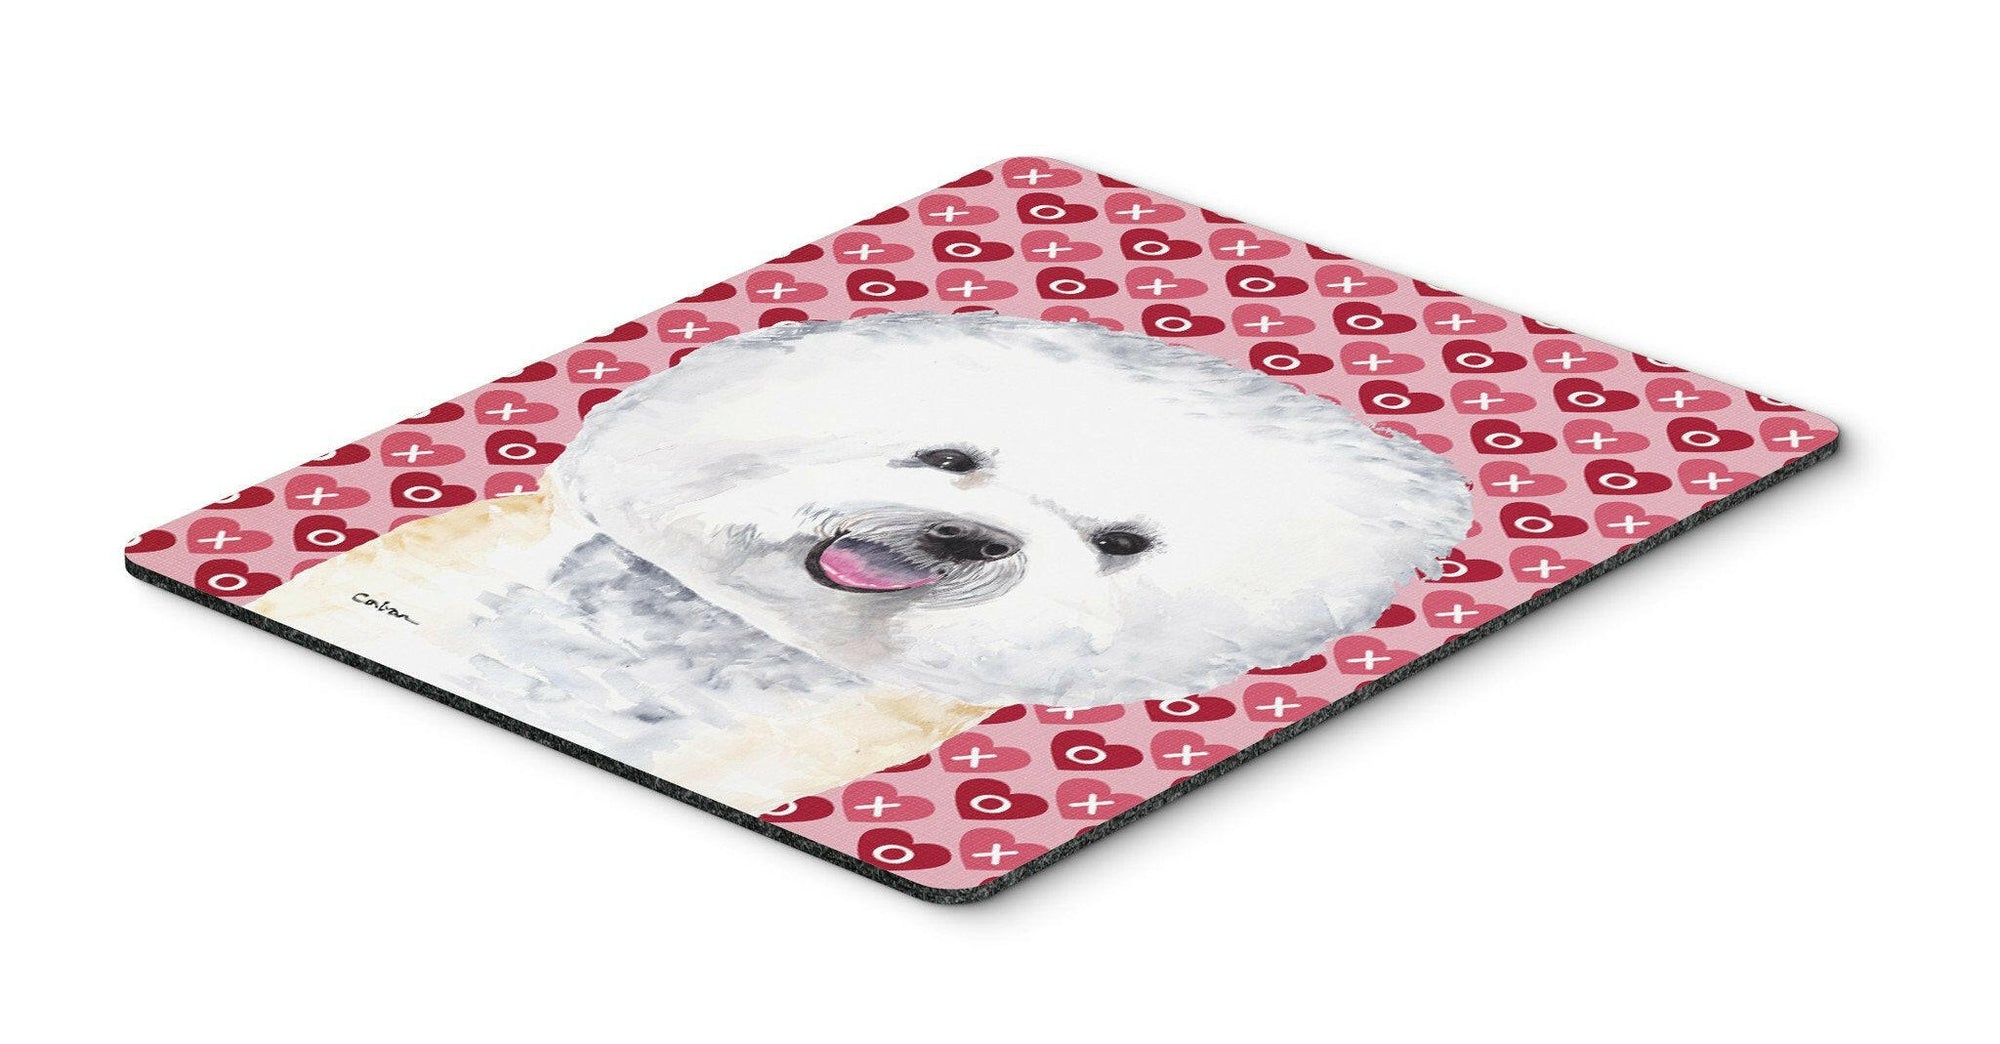 Bichon Frise Hearts Love and Valentine's Day Mouse Pad, Hot Pad or Trivet by Caroline's Treasures